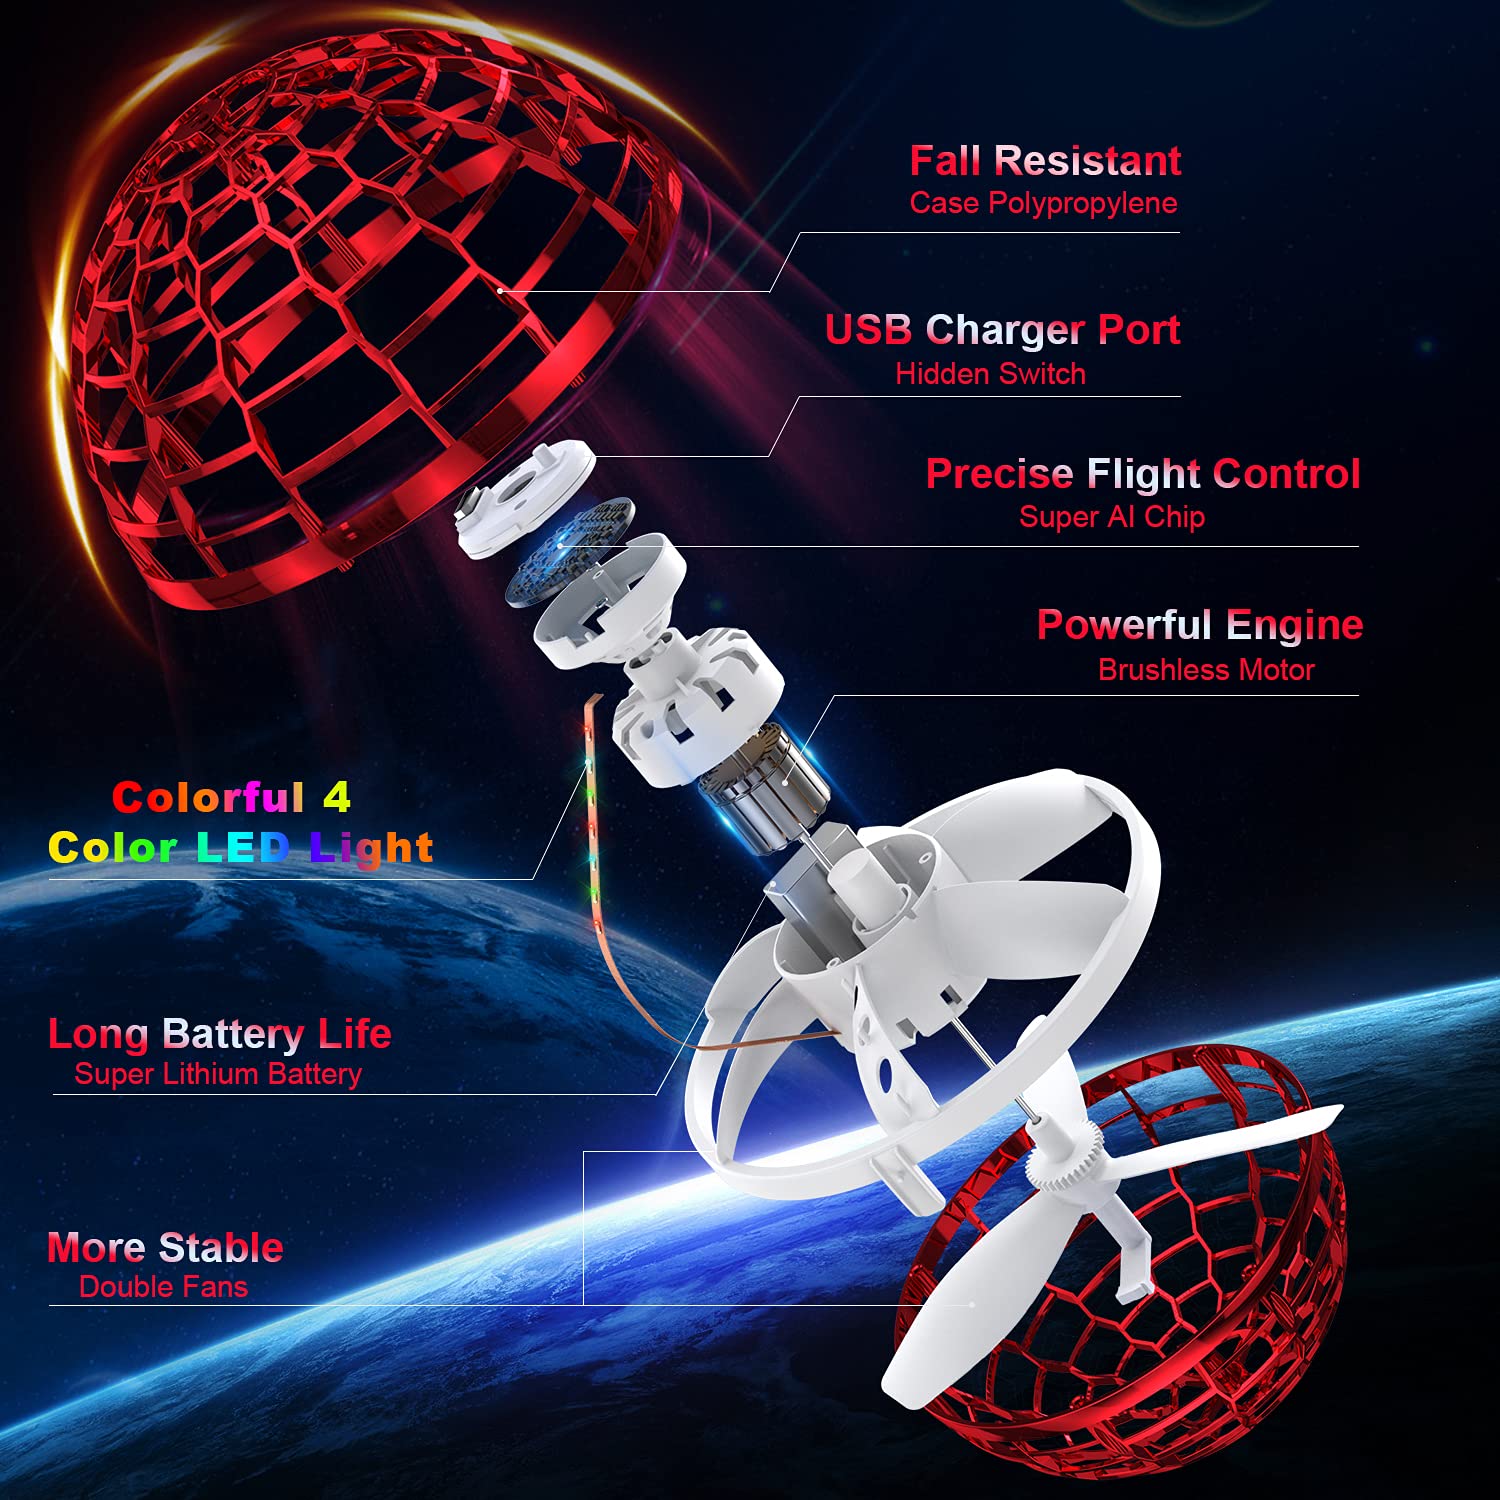 Flying Toys That Brings Magic into Reality Outdoor Cool Things Toys Flying Orb Ball Spinner Flynova Pro Hand Spinner Drones Ball Boomerang Fly Spinners Soring Fly Orb Nova Blue Hover UFO Drone Space